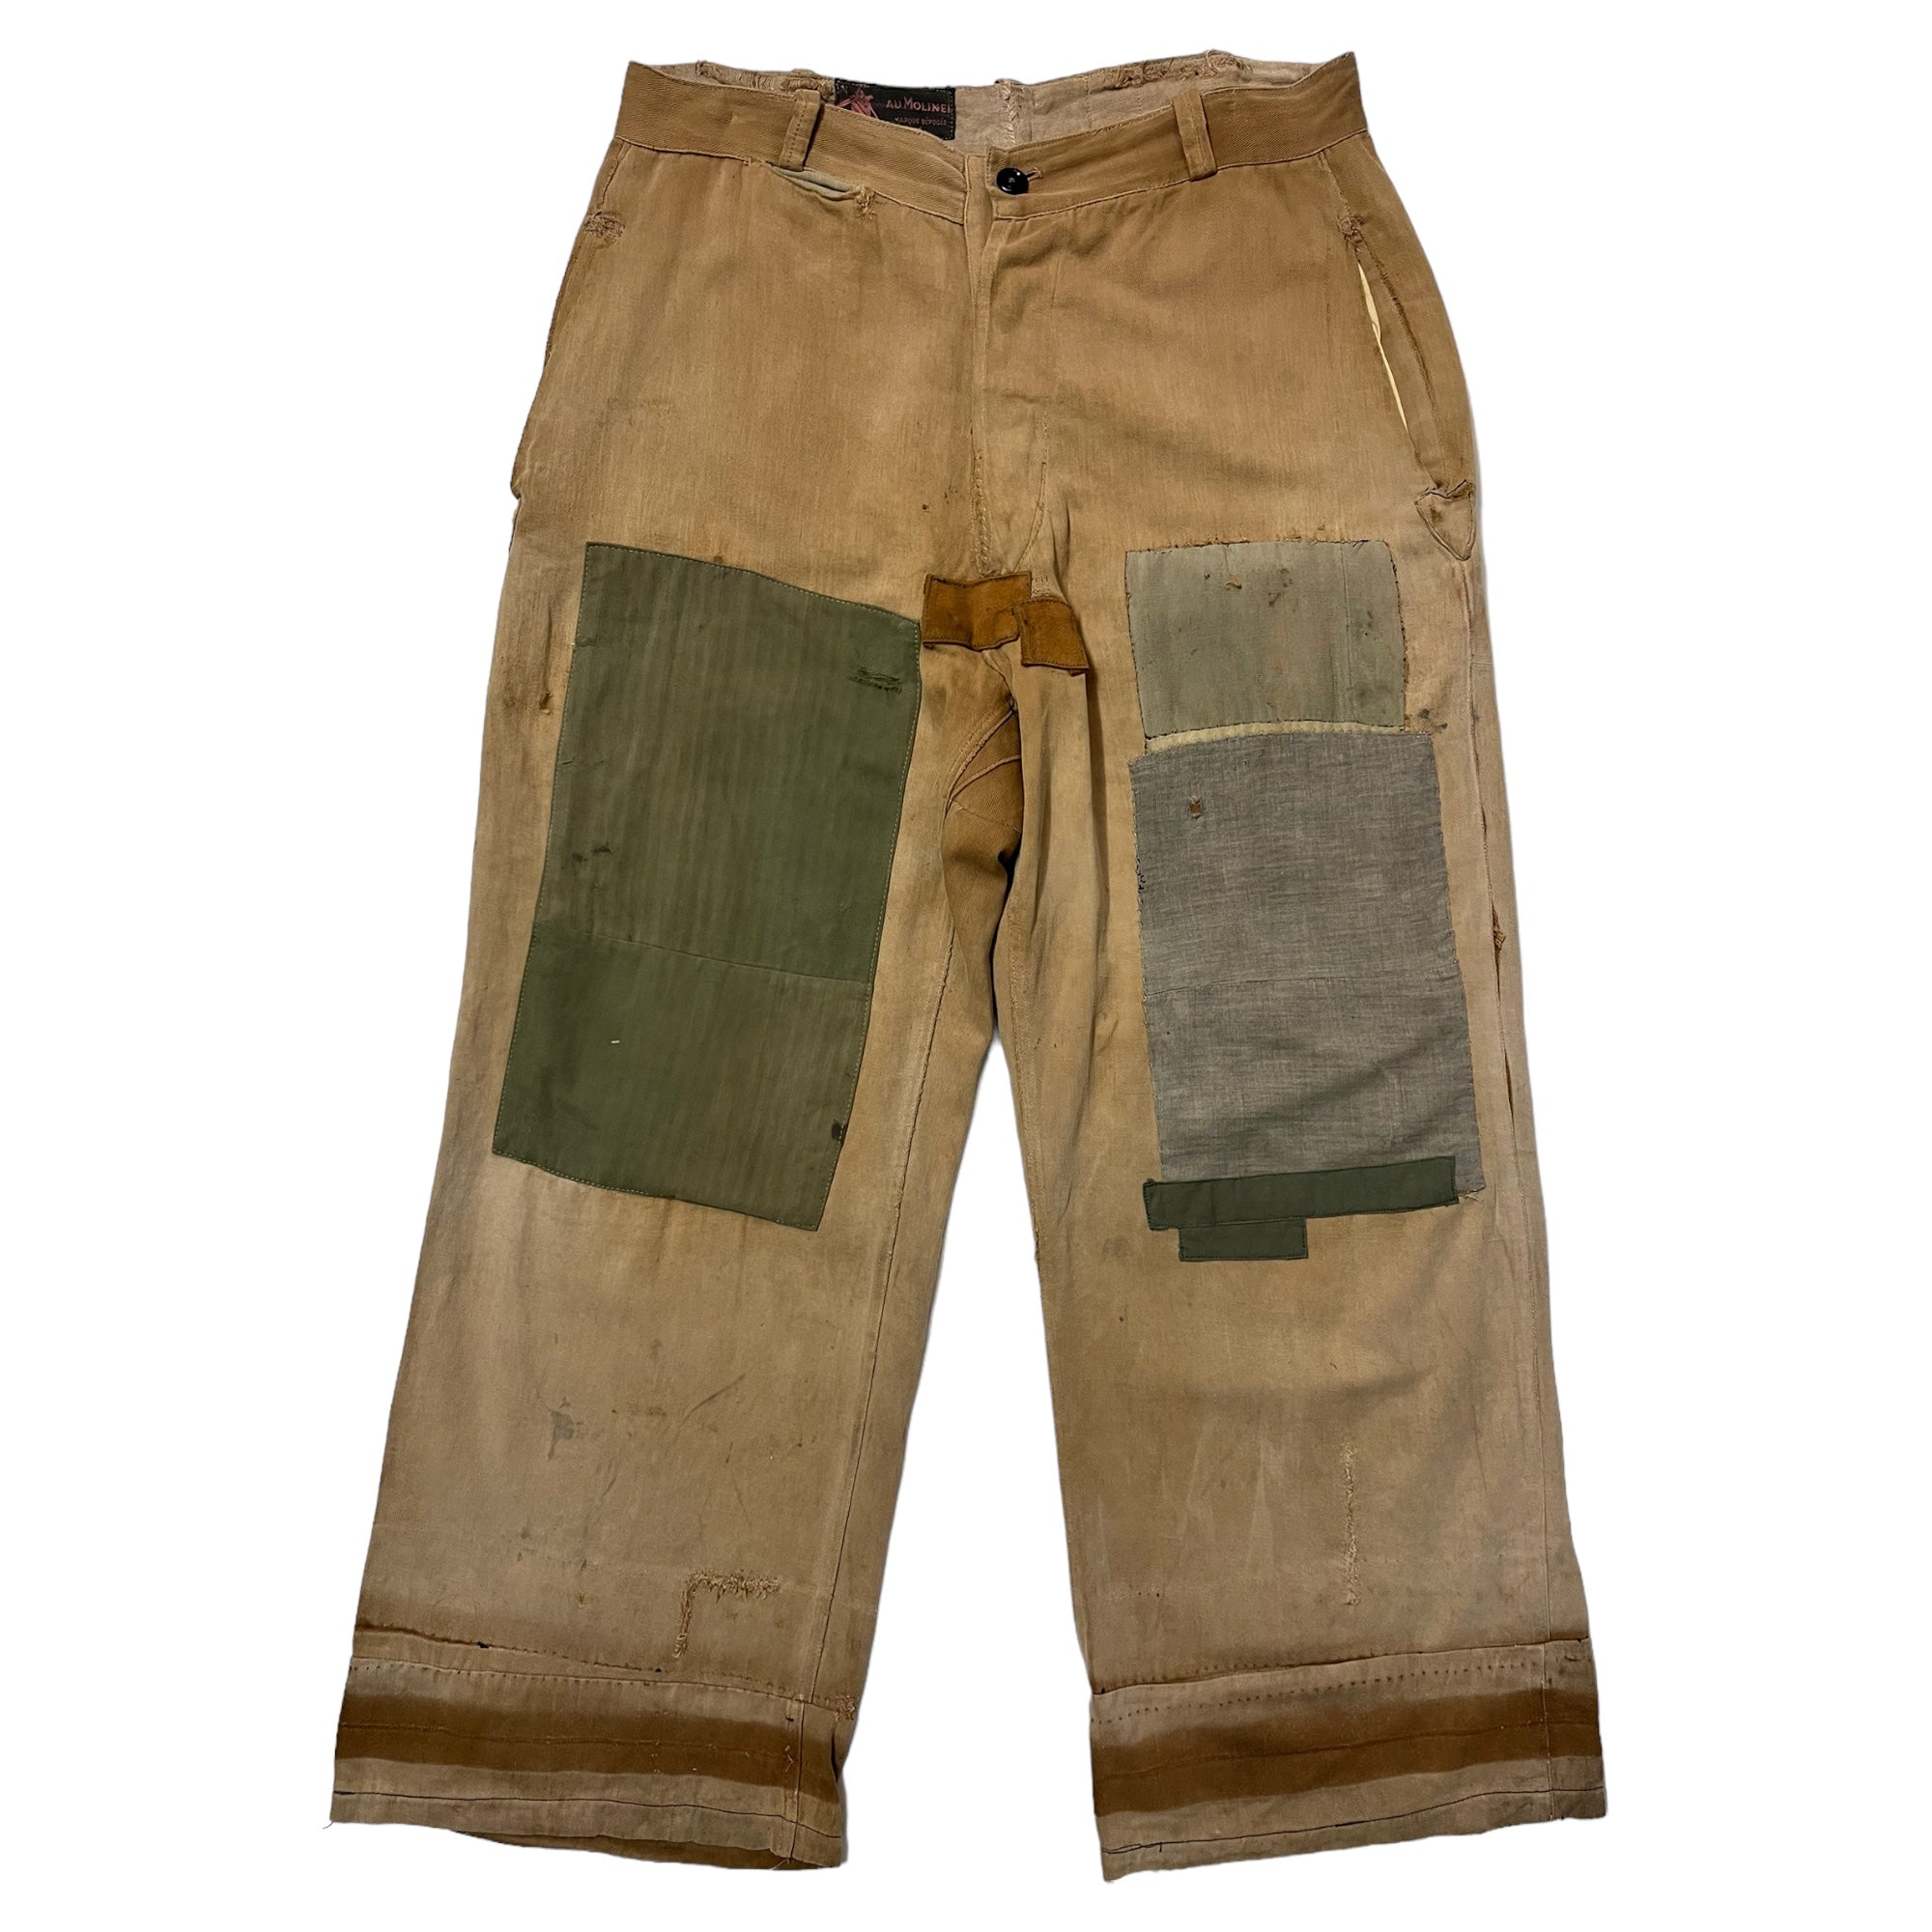 1930s Au Molinel French Tan Moleskin Heavily Repaired Work Trousers - Faded Tan - 30/27